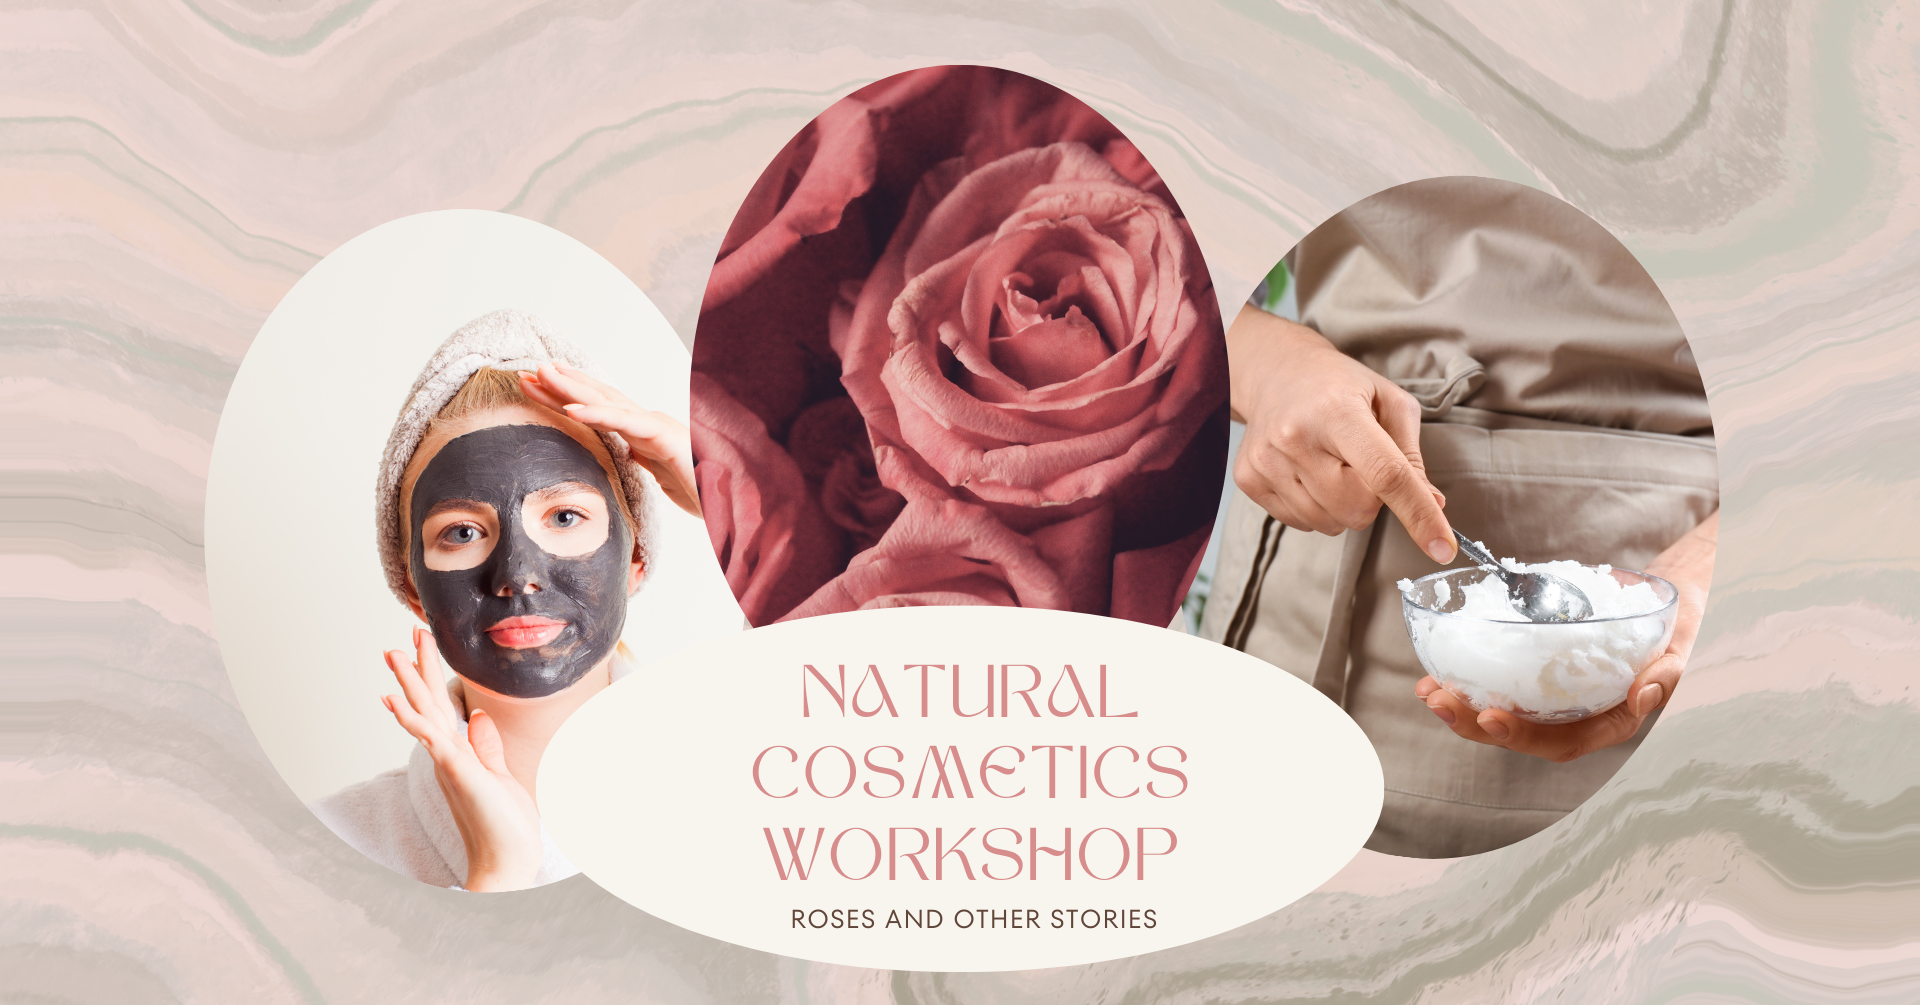 Natural Cosmetics Workshop – Roses and Other Stories